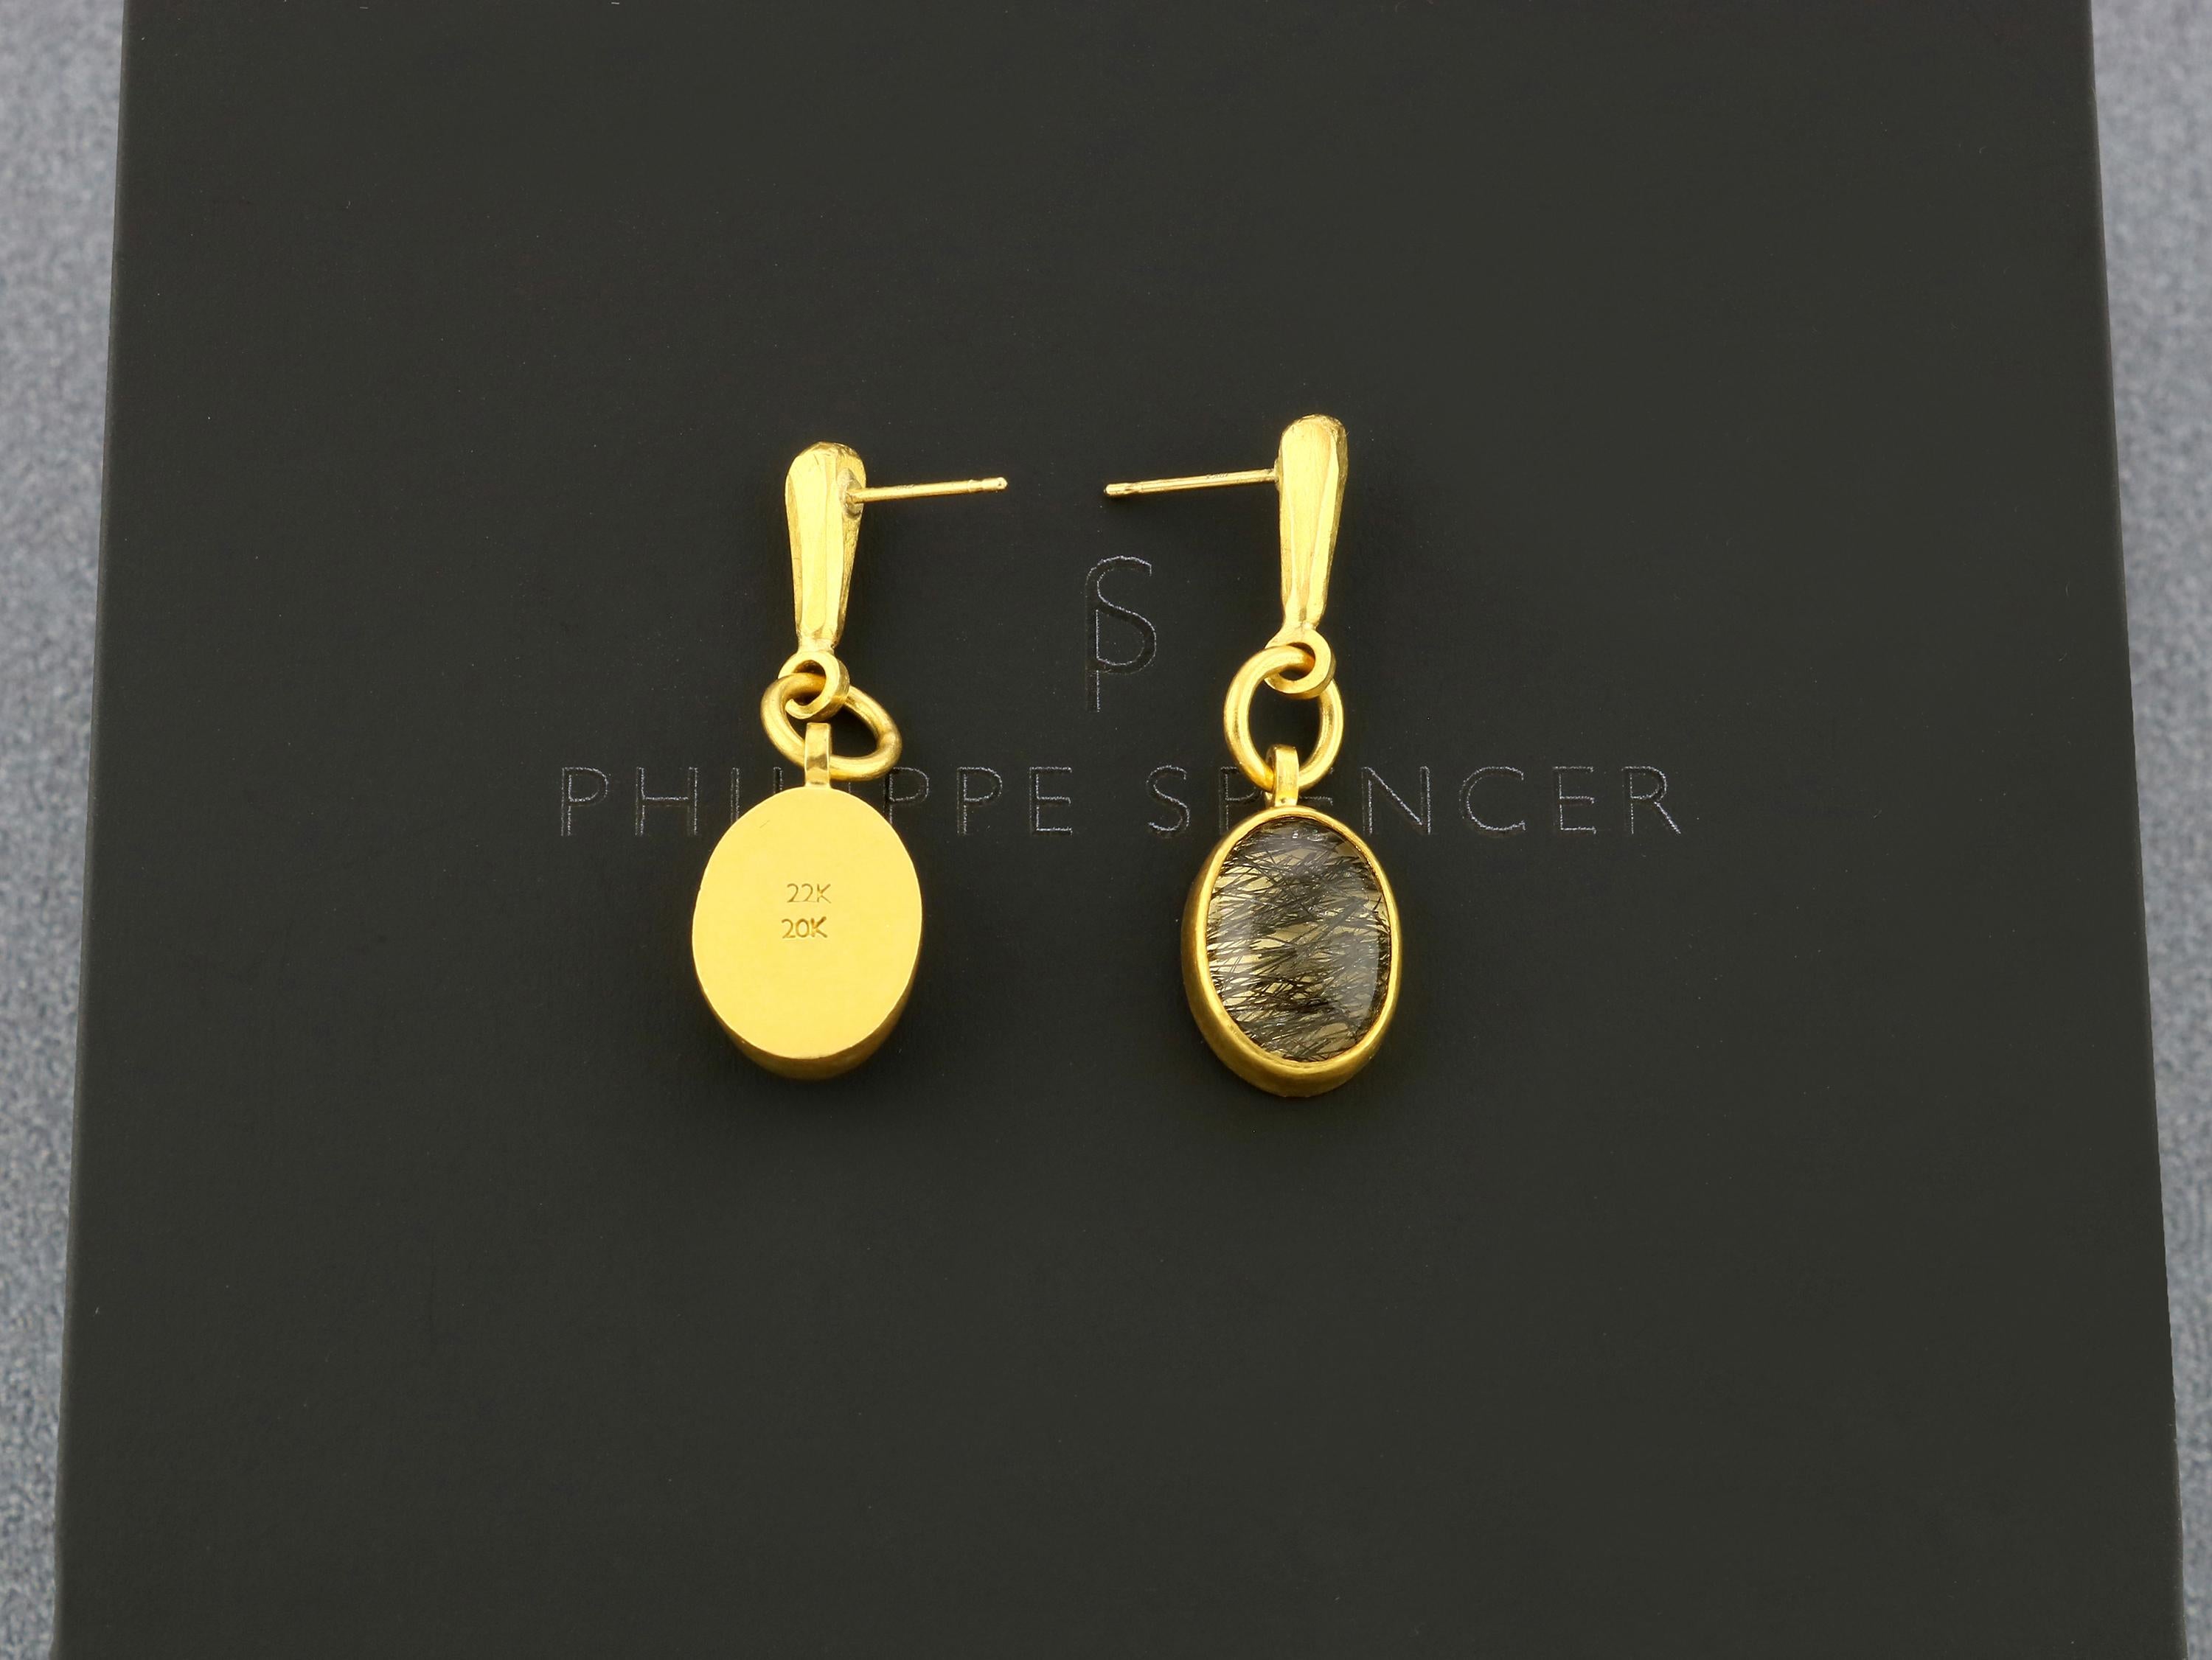 PHILIPPE SPENCER -Black Tourmaline Quartz Bezel Set in Pure 22K Gold, with Solid 20K Gold Connection Links & Features. 18K Post Back & Friction Nut for durability. 

These beautiful and unique Hand-Forged Dangling Statement Earrings are 1.5